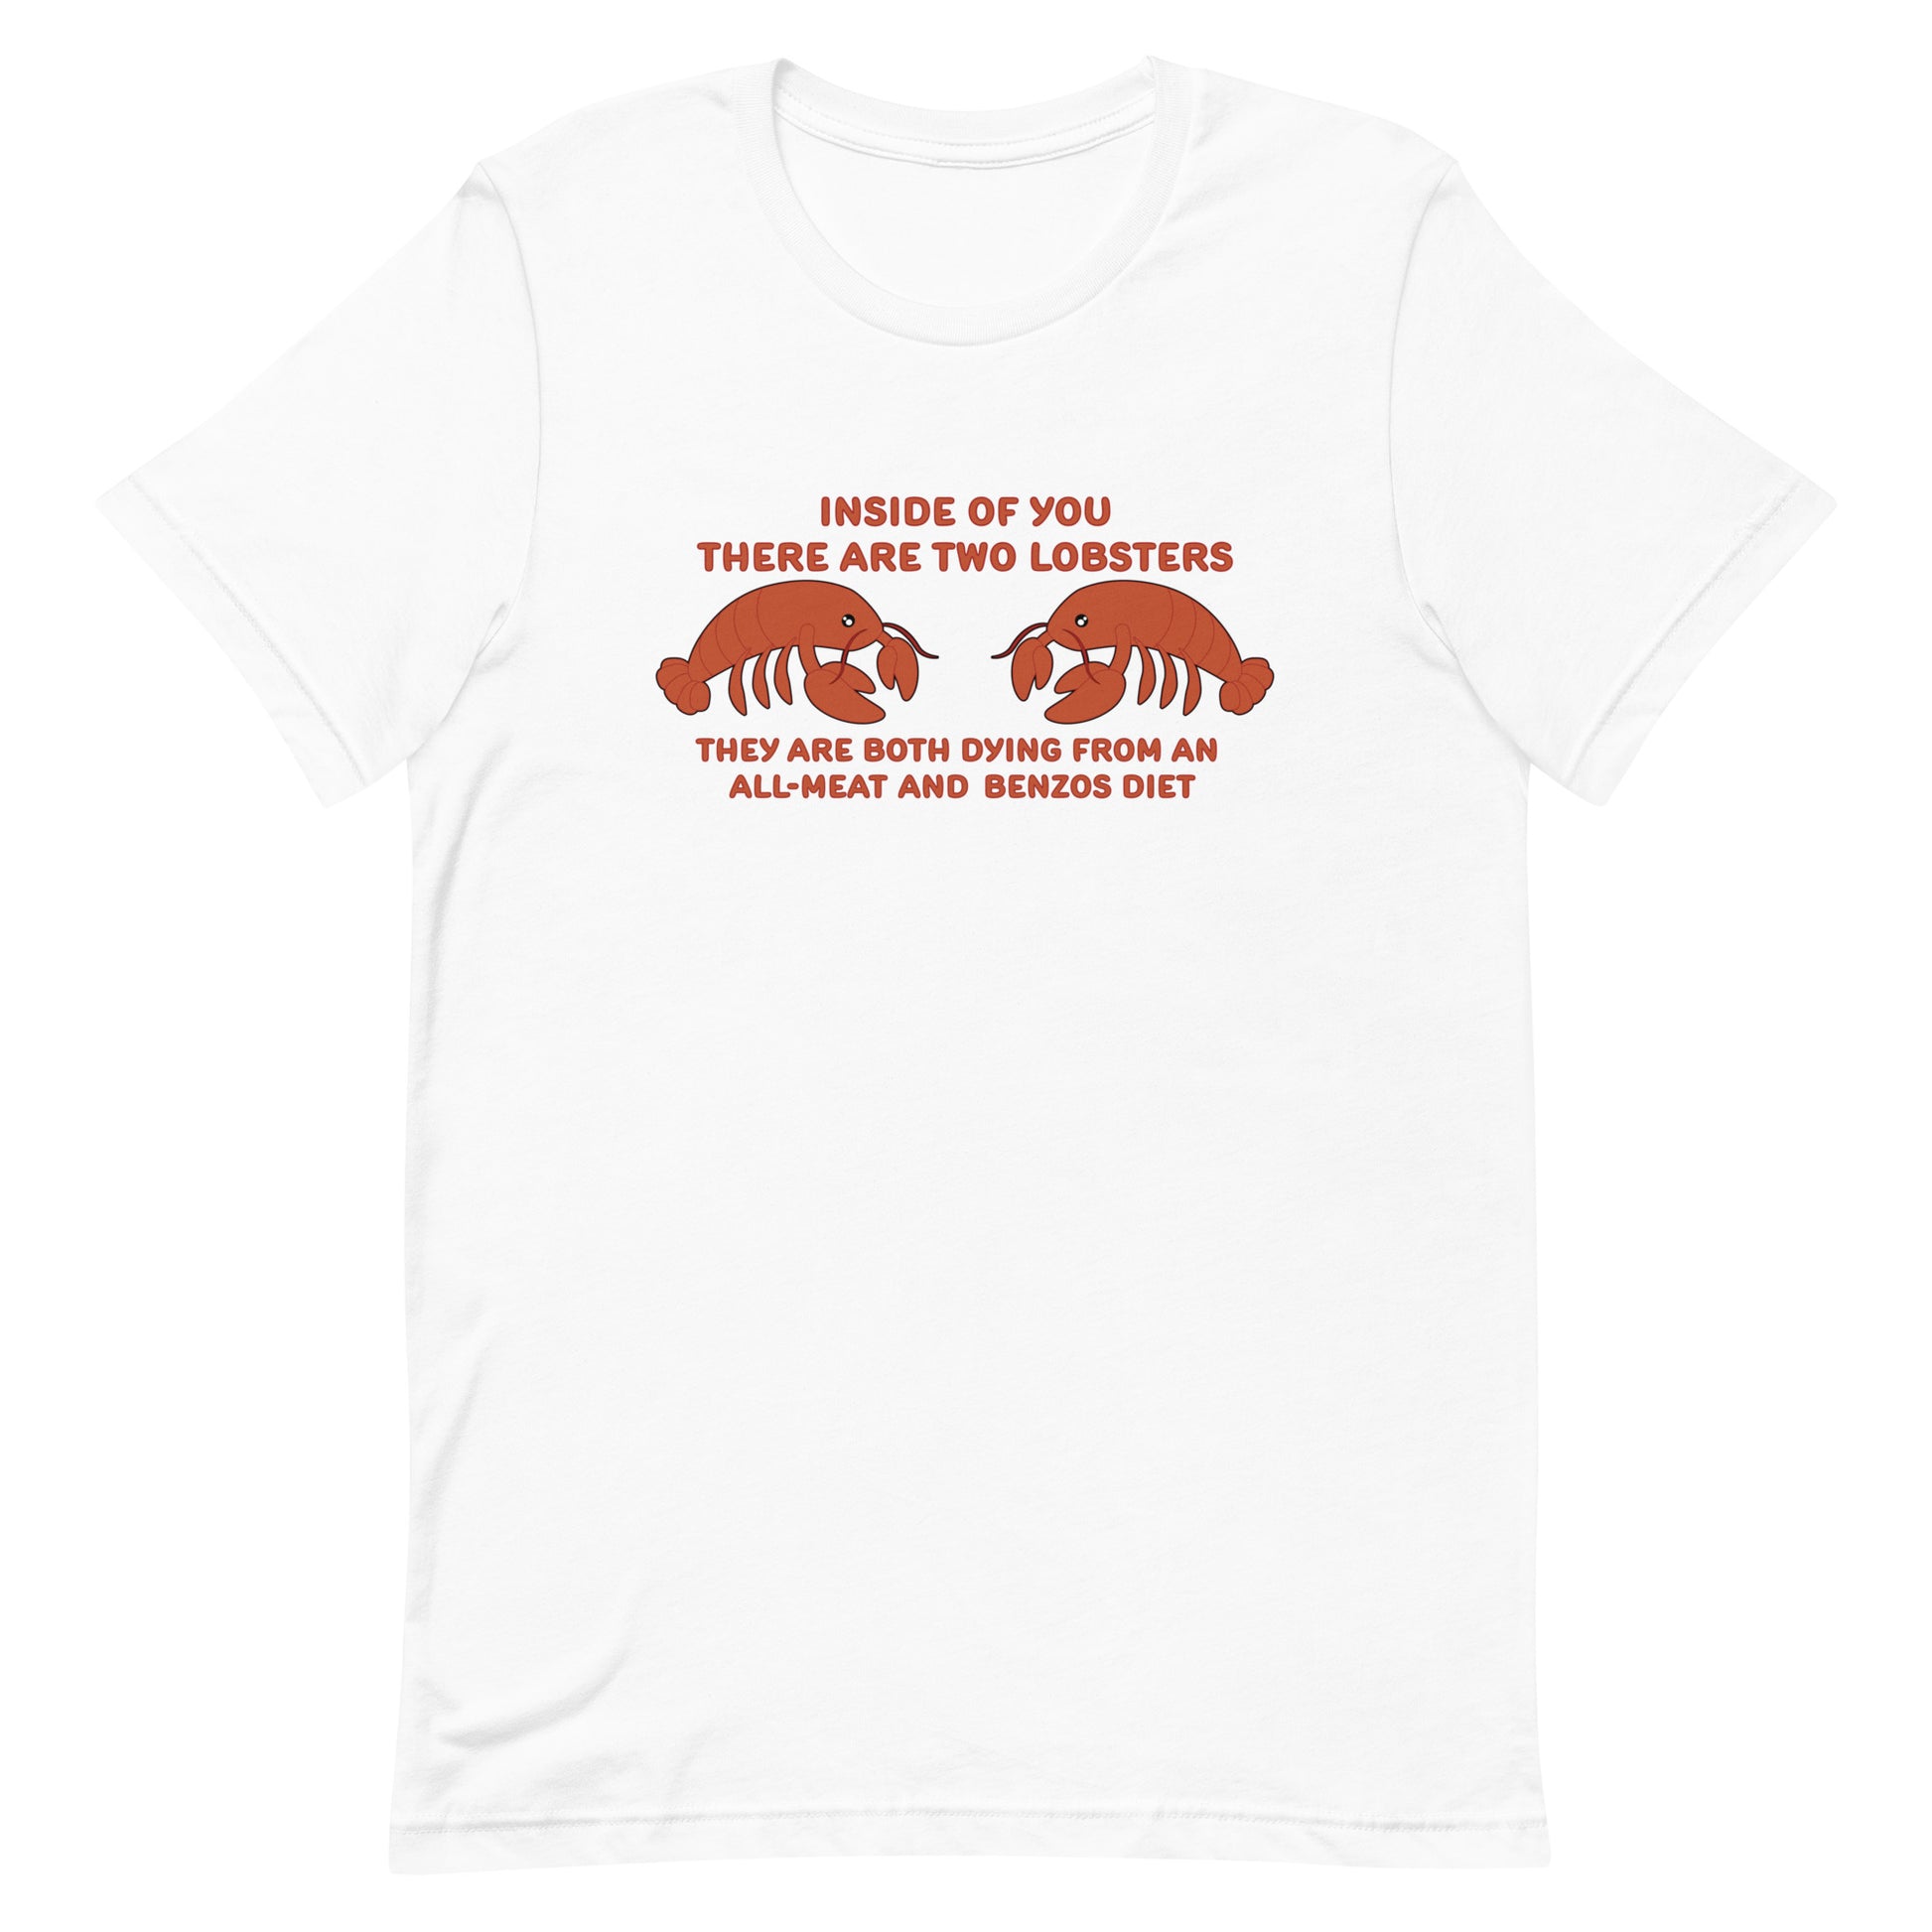 A white crewneck t-shirt featuring an illustration of two lobsters surrounded by text that reads "Inside of you there are two lobsters. They are both dying from an all-meat and benzos diet"